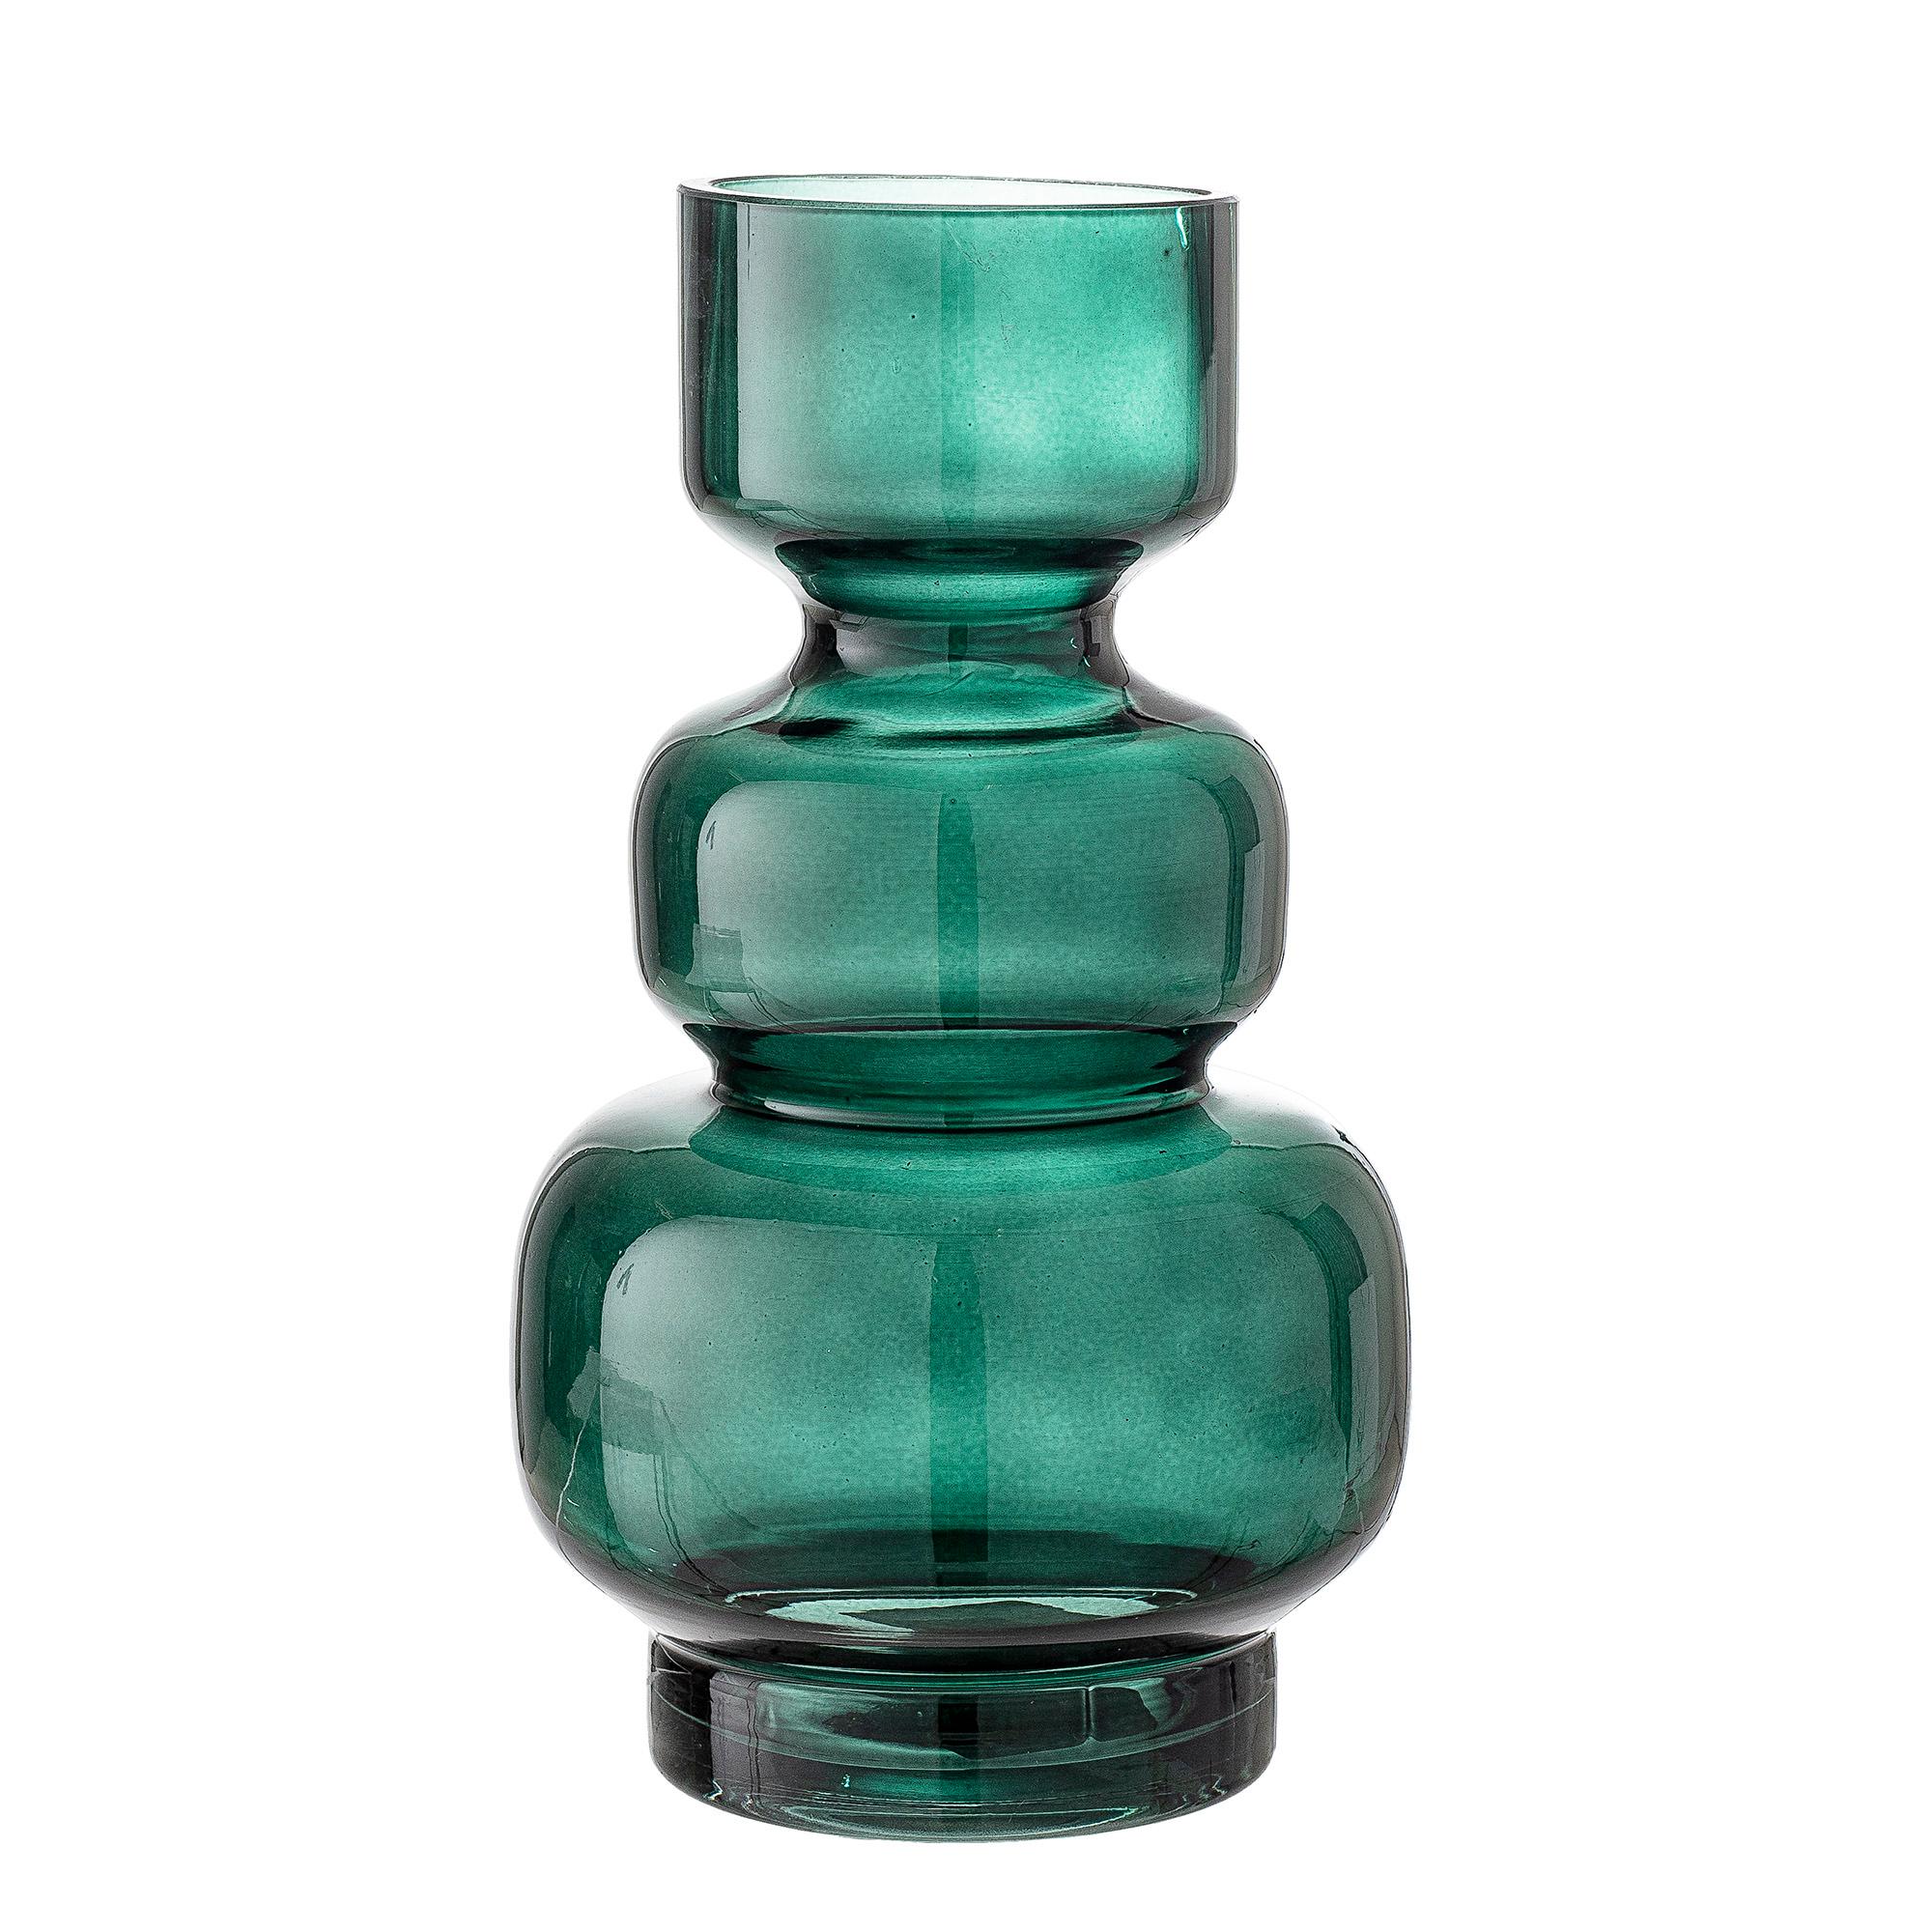 Cold-Painted Brutalist Era Style Green Colored Glass Vase, 21st Century